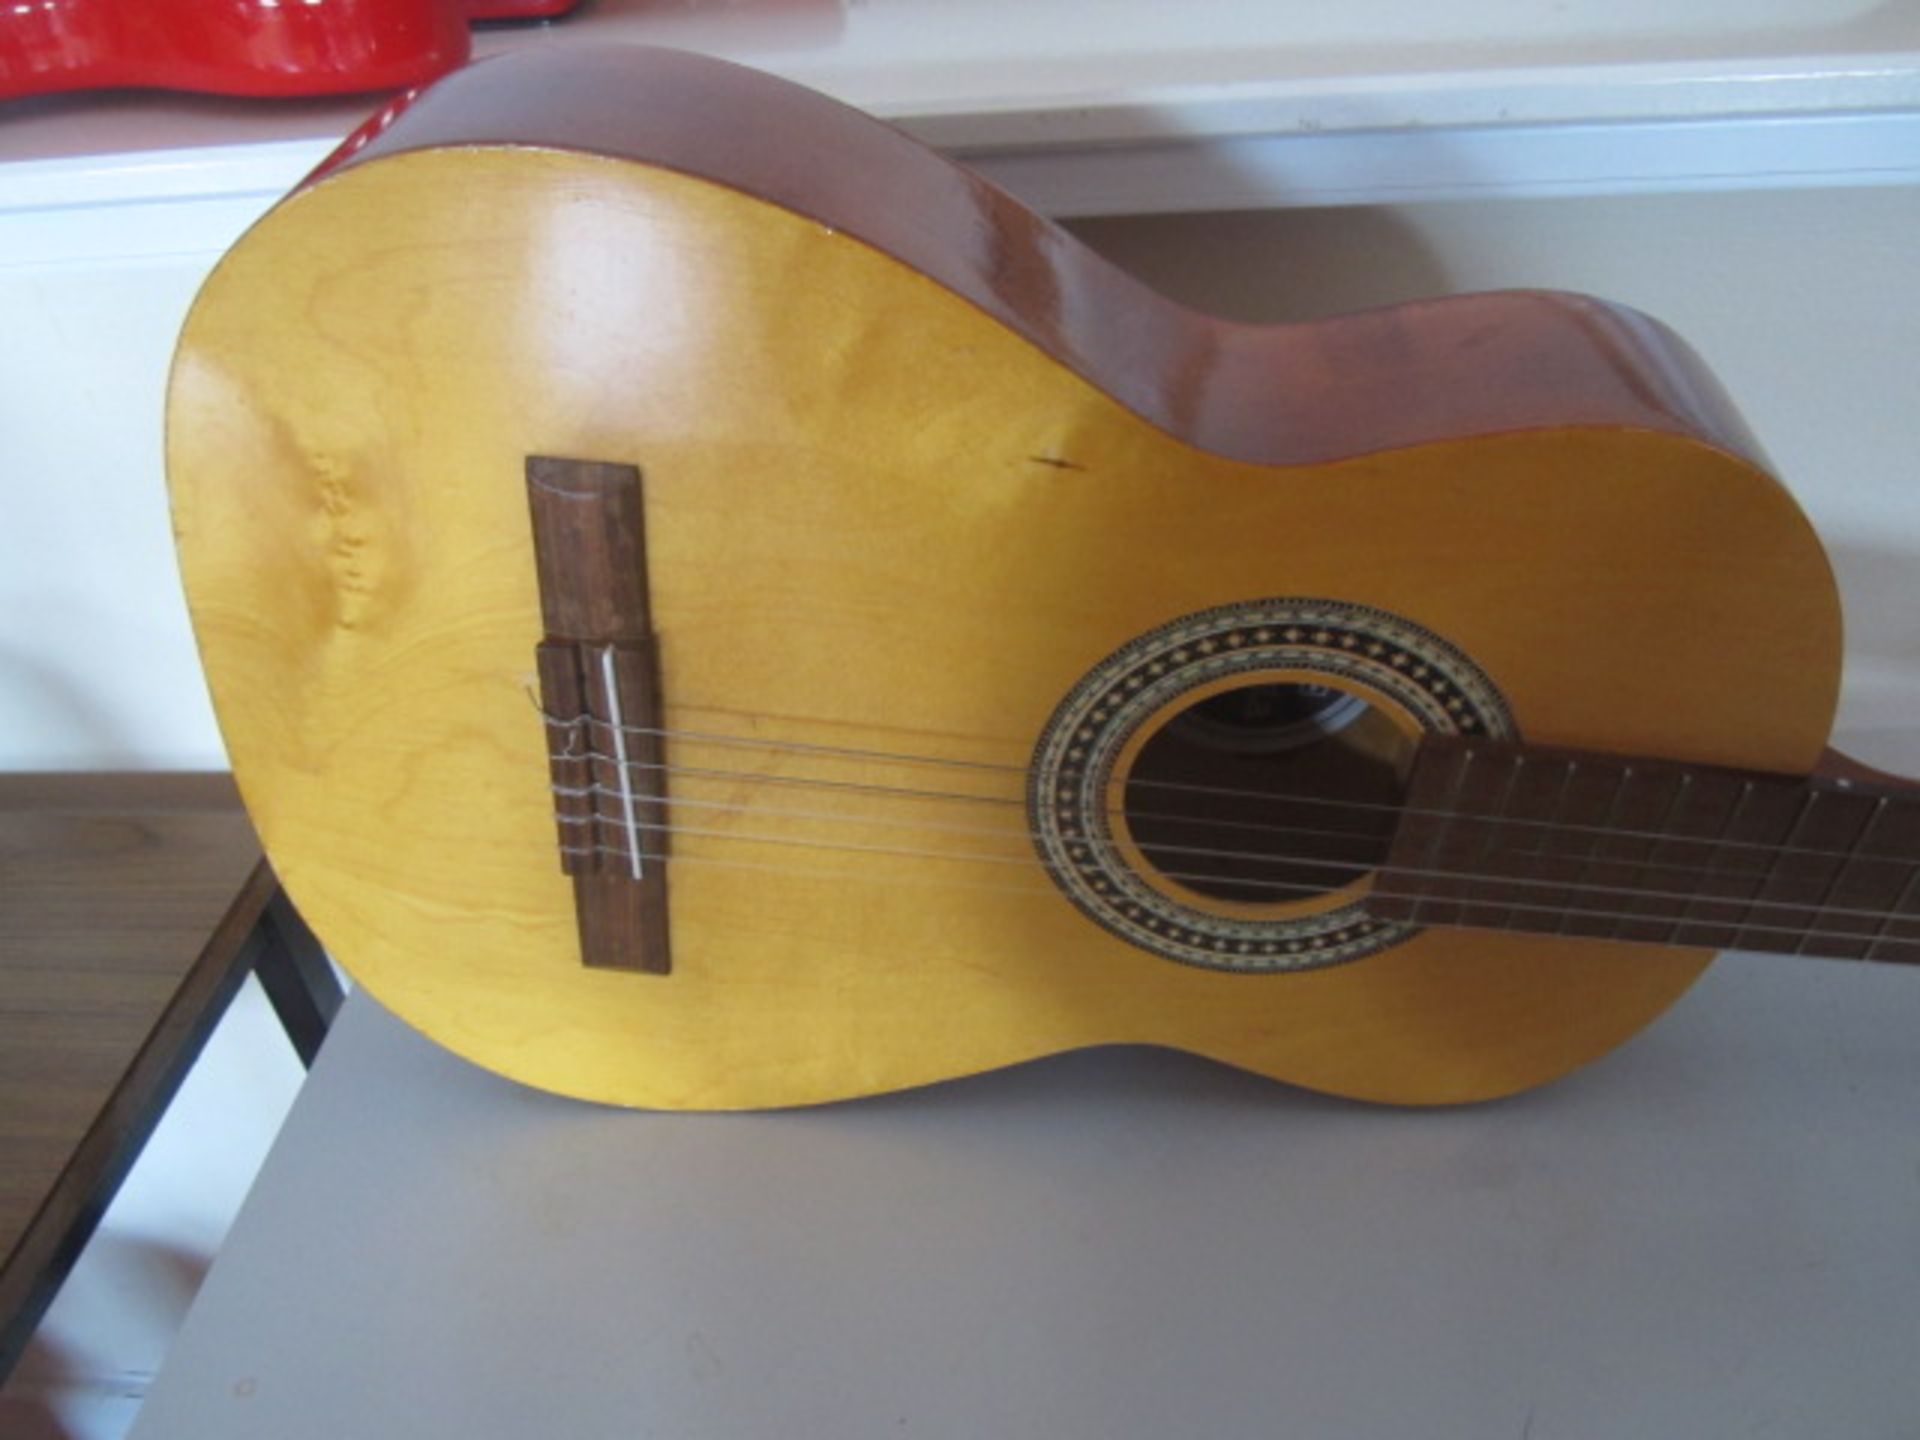 Constanta Class no. 3058 acoustic guitar. Located at main schoolPlease note: This lot, for VAT - Image 2 of 4